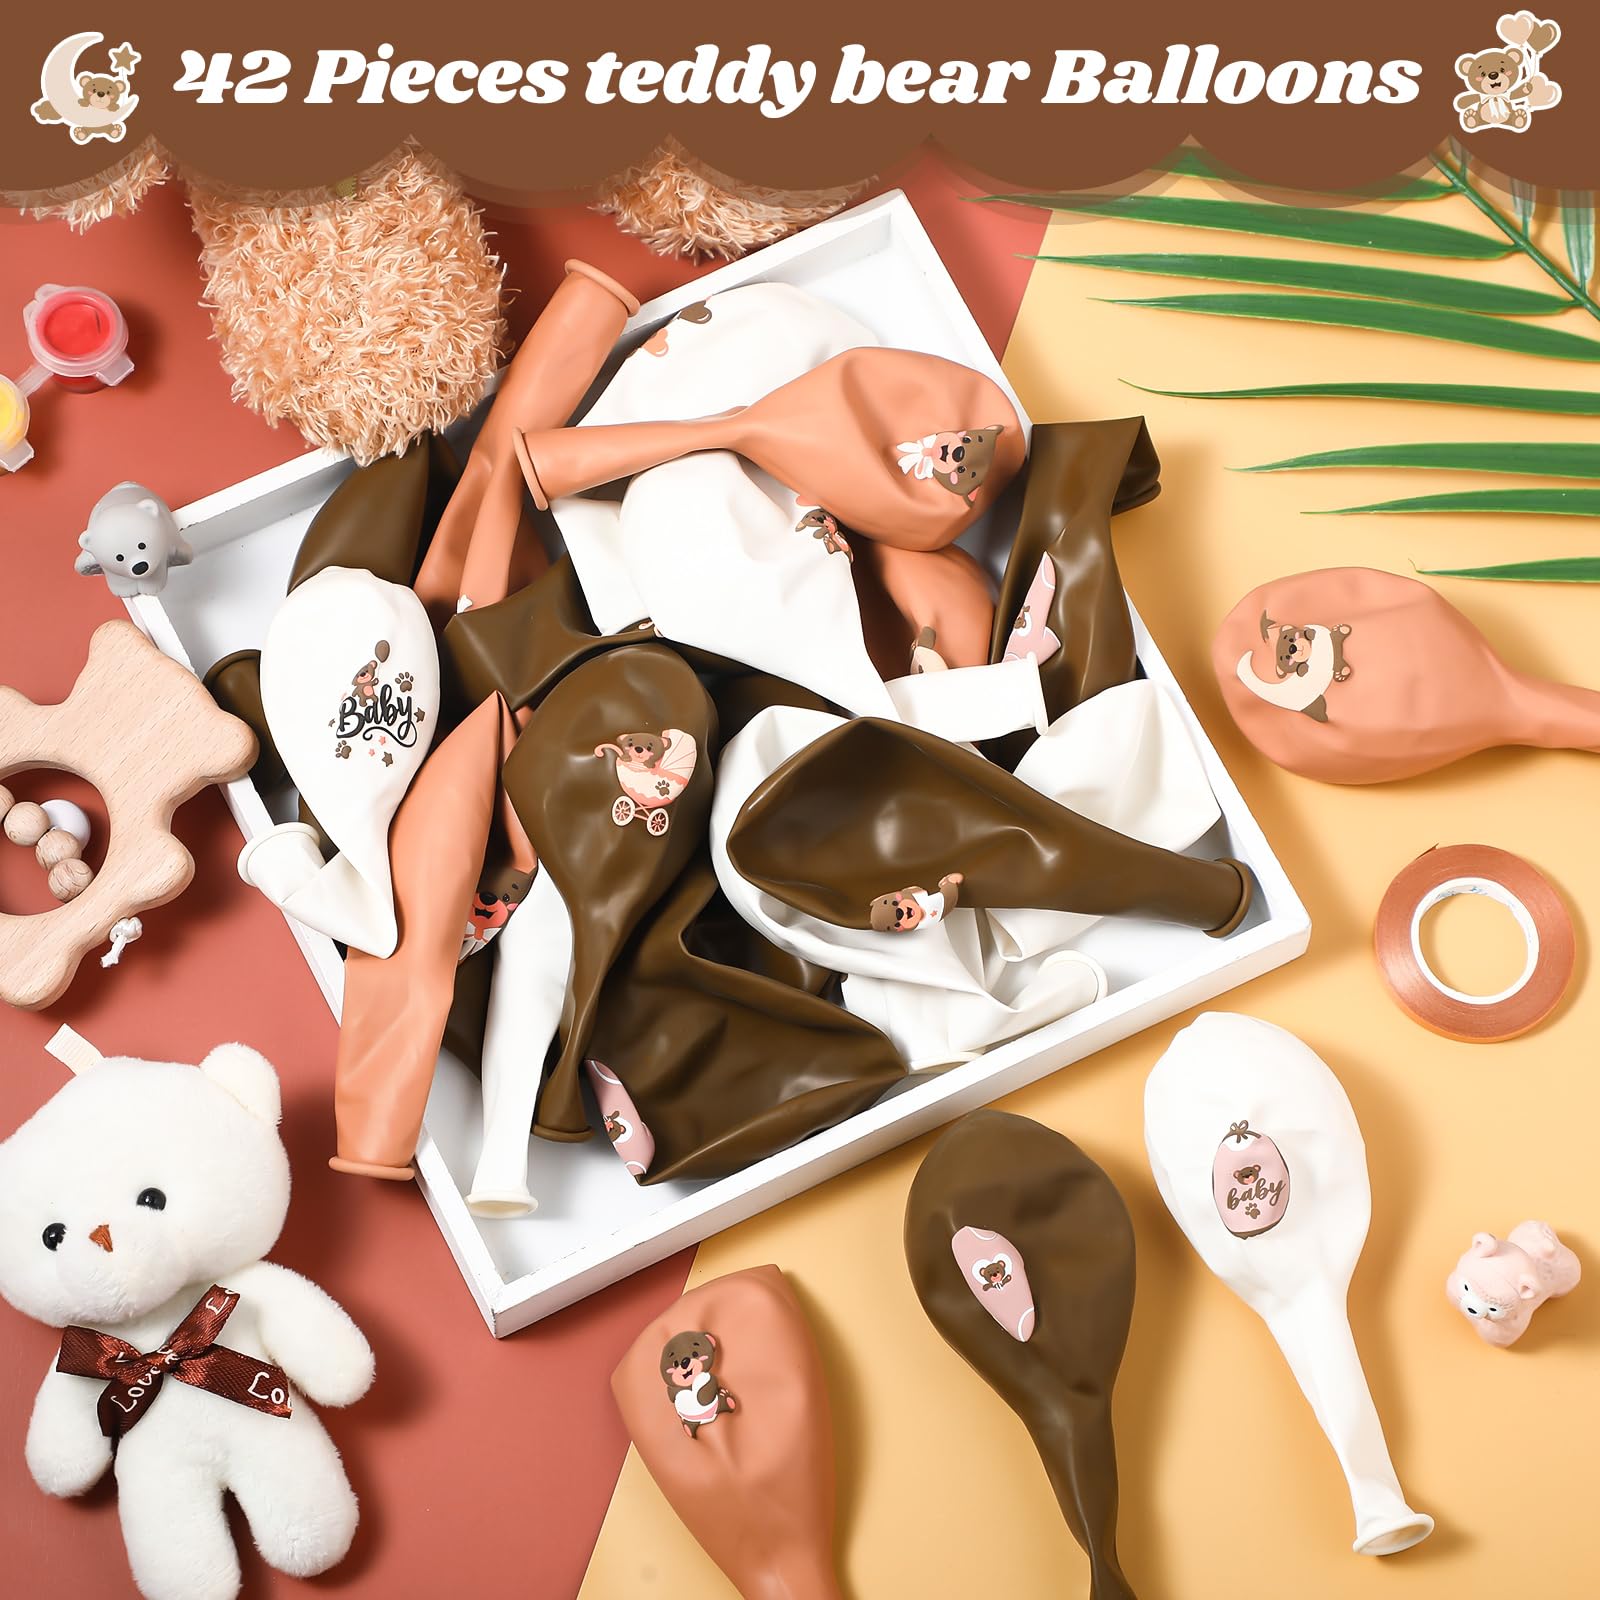 Glimin 42 Pieces Bear Balloons Set 24 Inch Bear Baby Shower Foil Balloons Cute Bear Shaped Balloons 12 Inch Brown Bear Latex Balloons for Bear Baby Shower Birthday Party Decoration Supplies